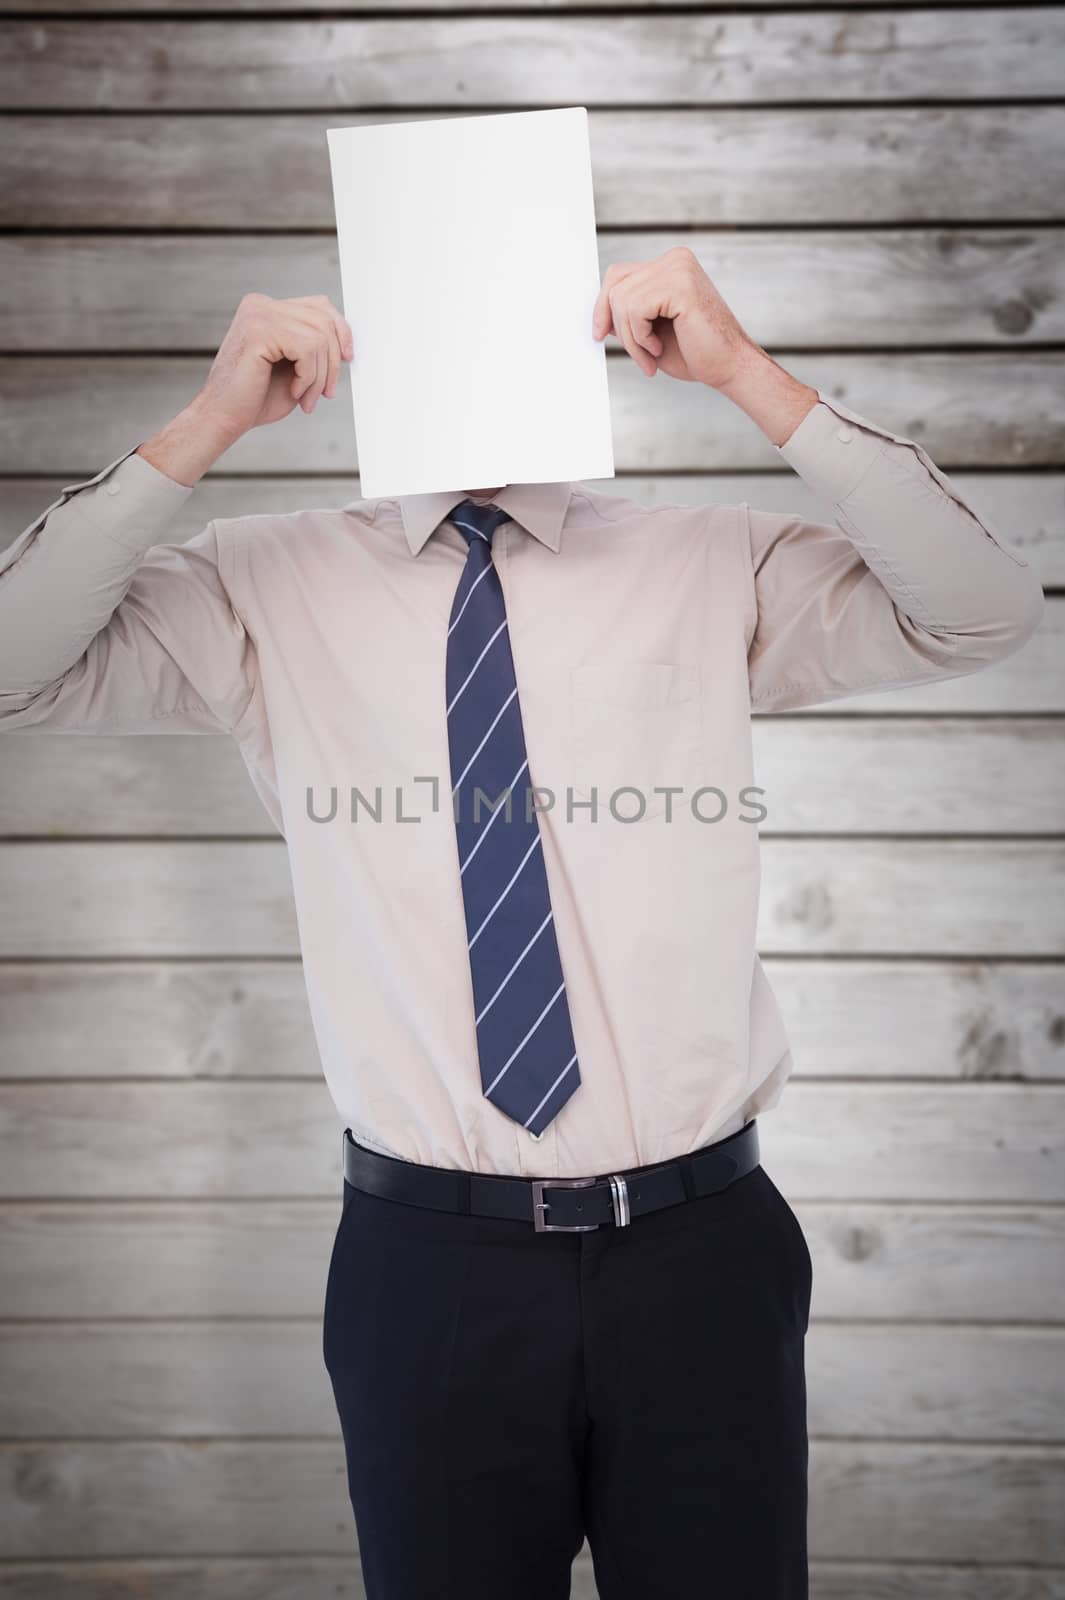 Businessman showing card in front of his head against wooden planks